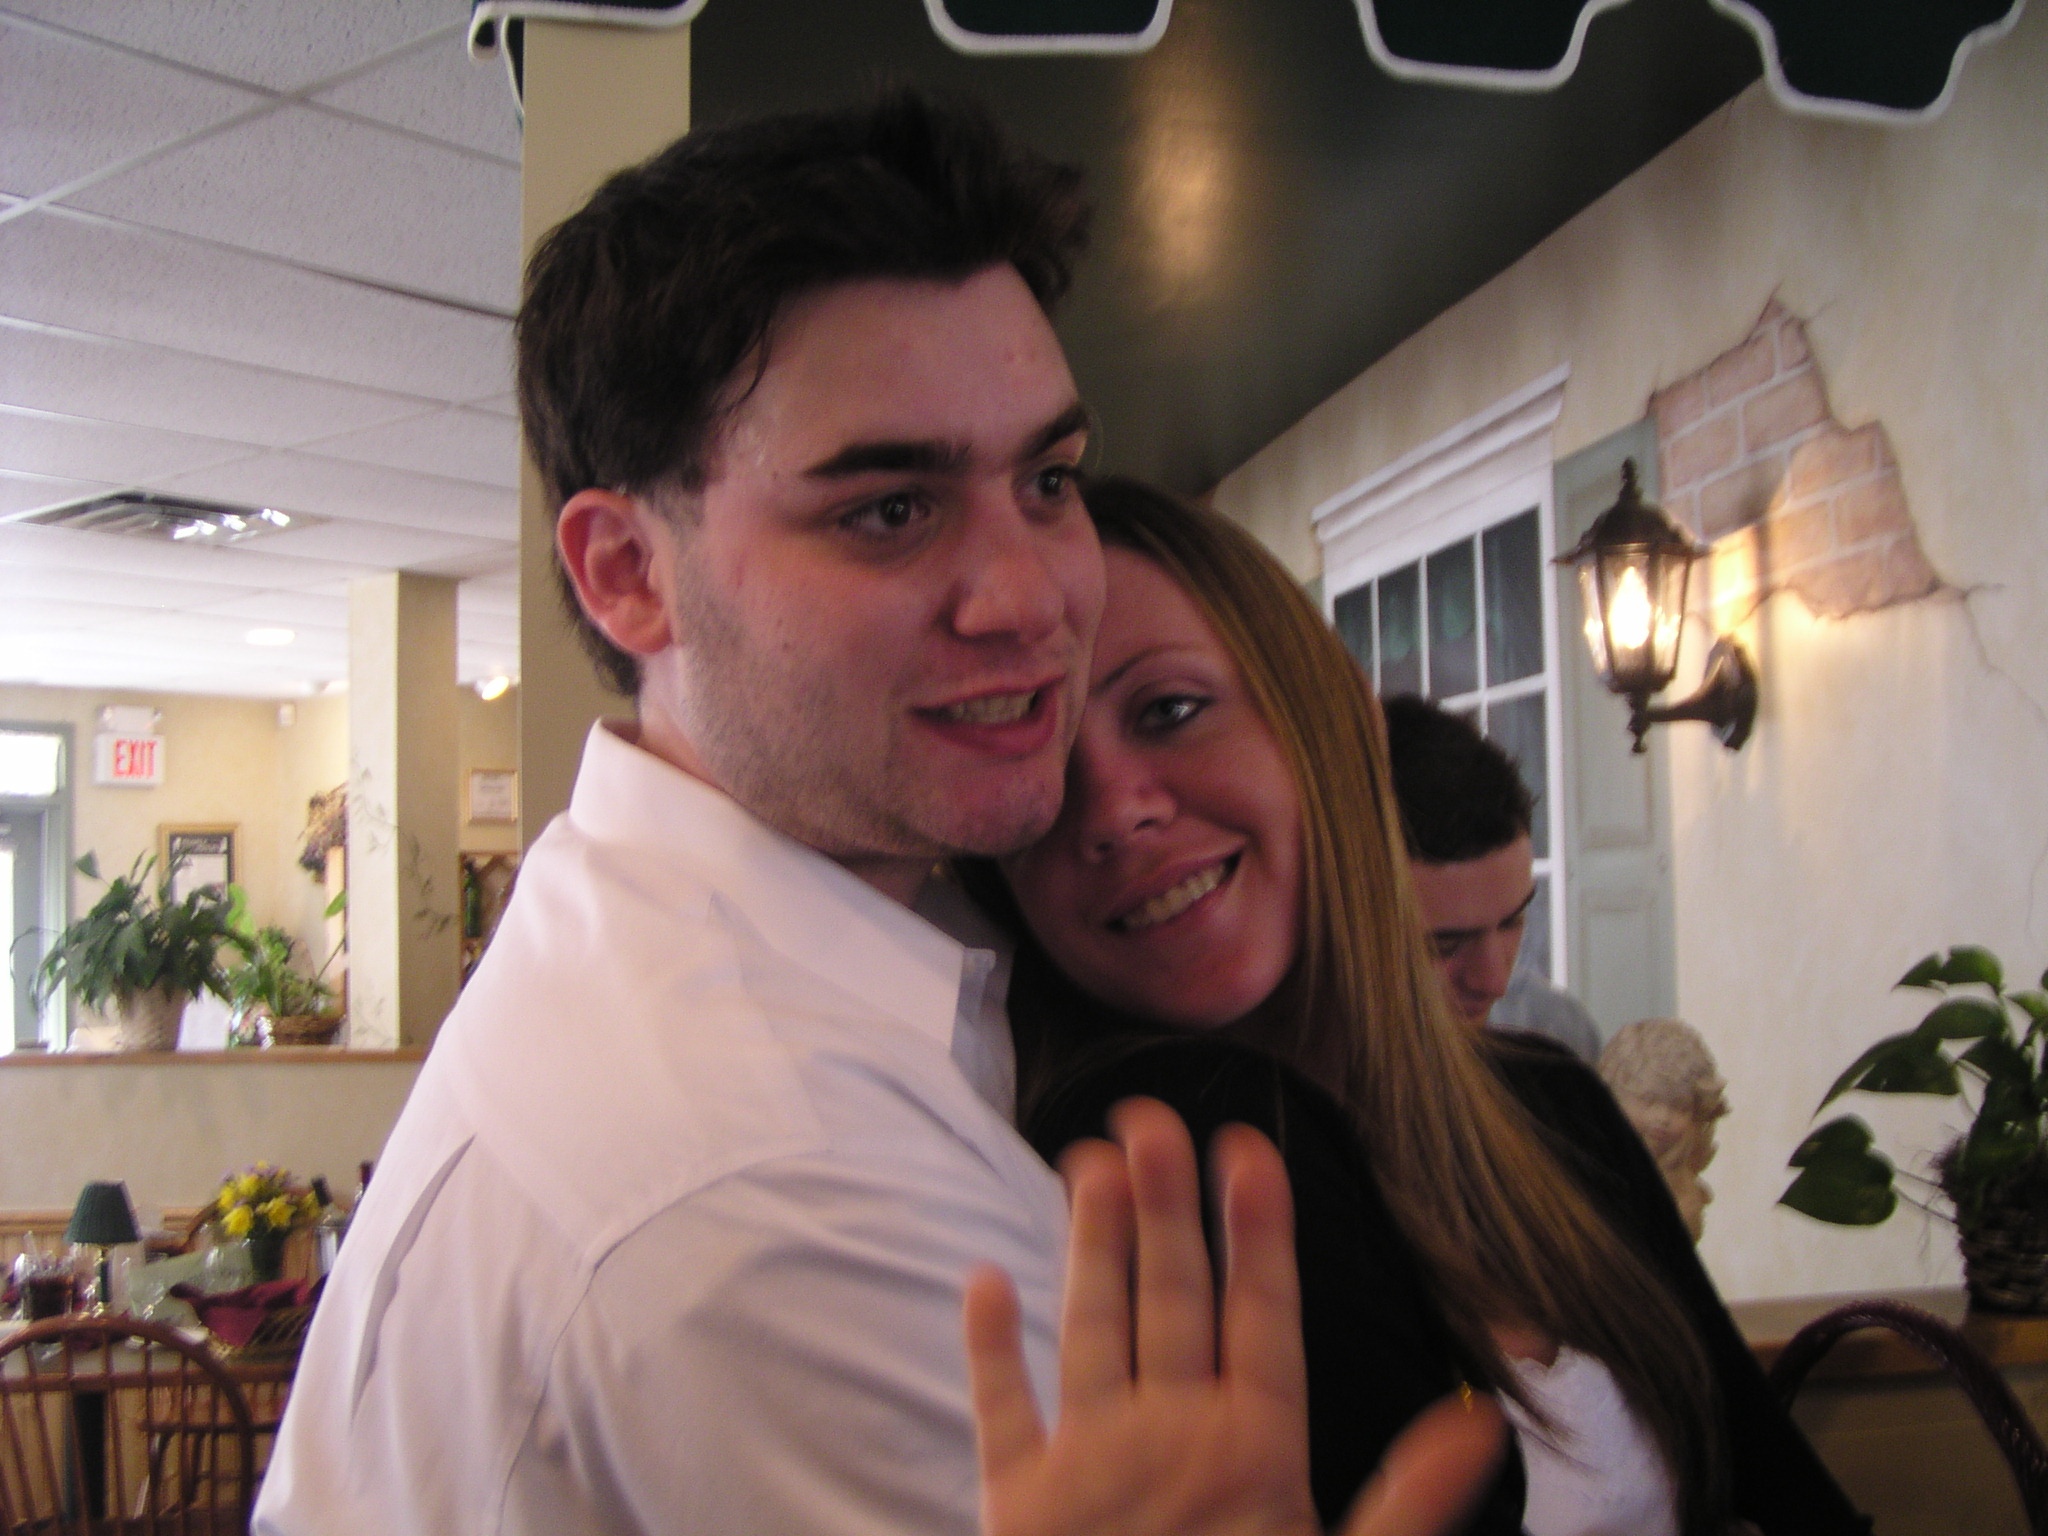 a woman hugging and giving the peace sign to a man